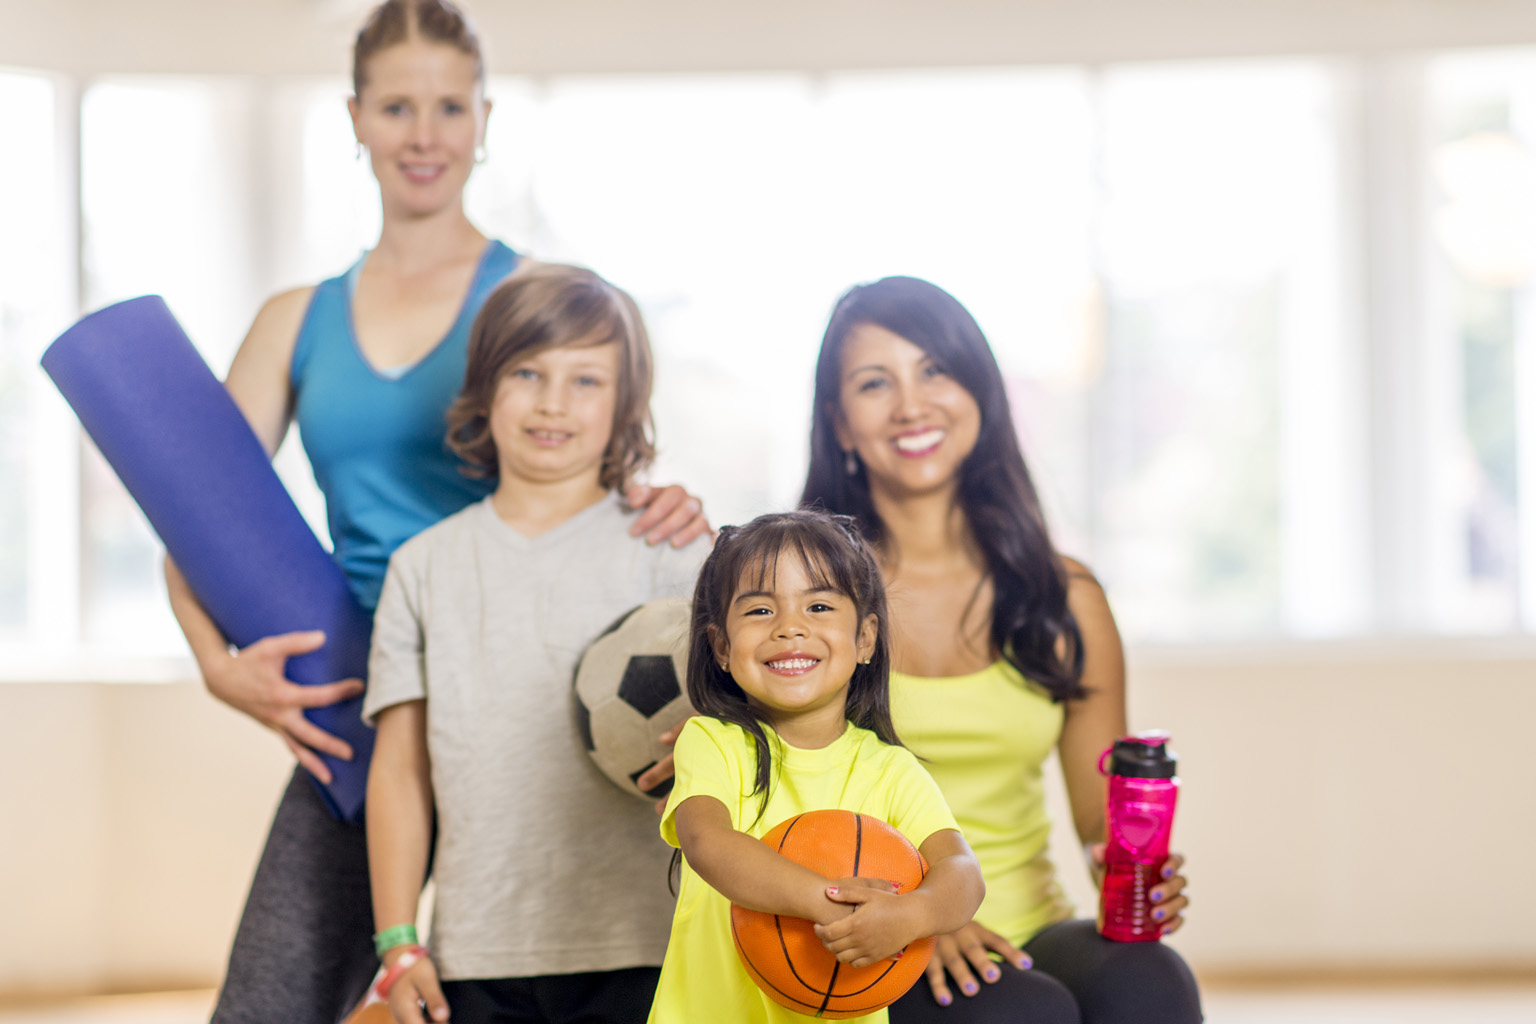 A woman holding a yoga mat, a boy with a soccer ball, a young girl with a basketball and a woman holding a sports drink bottle